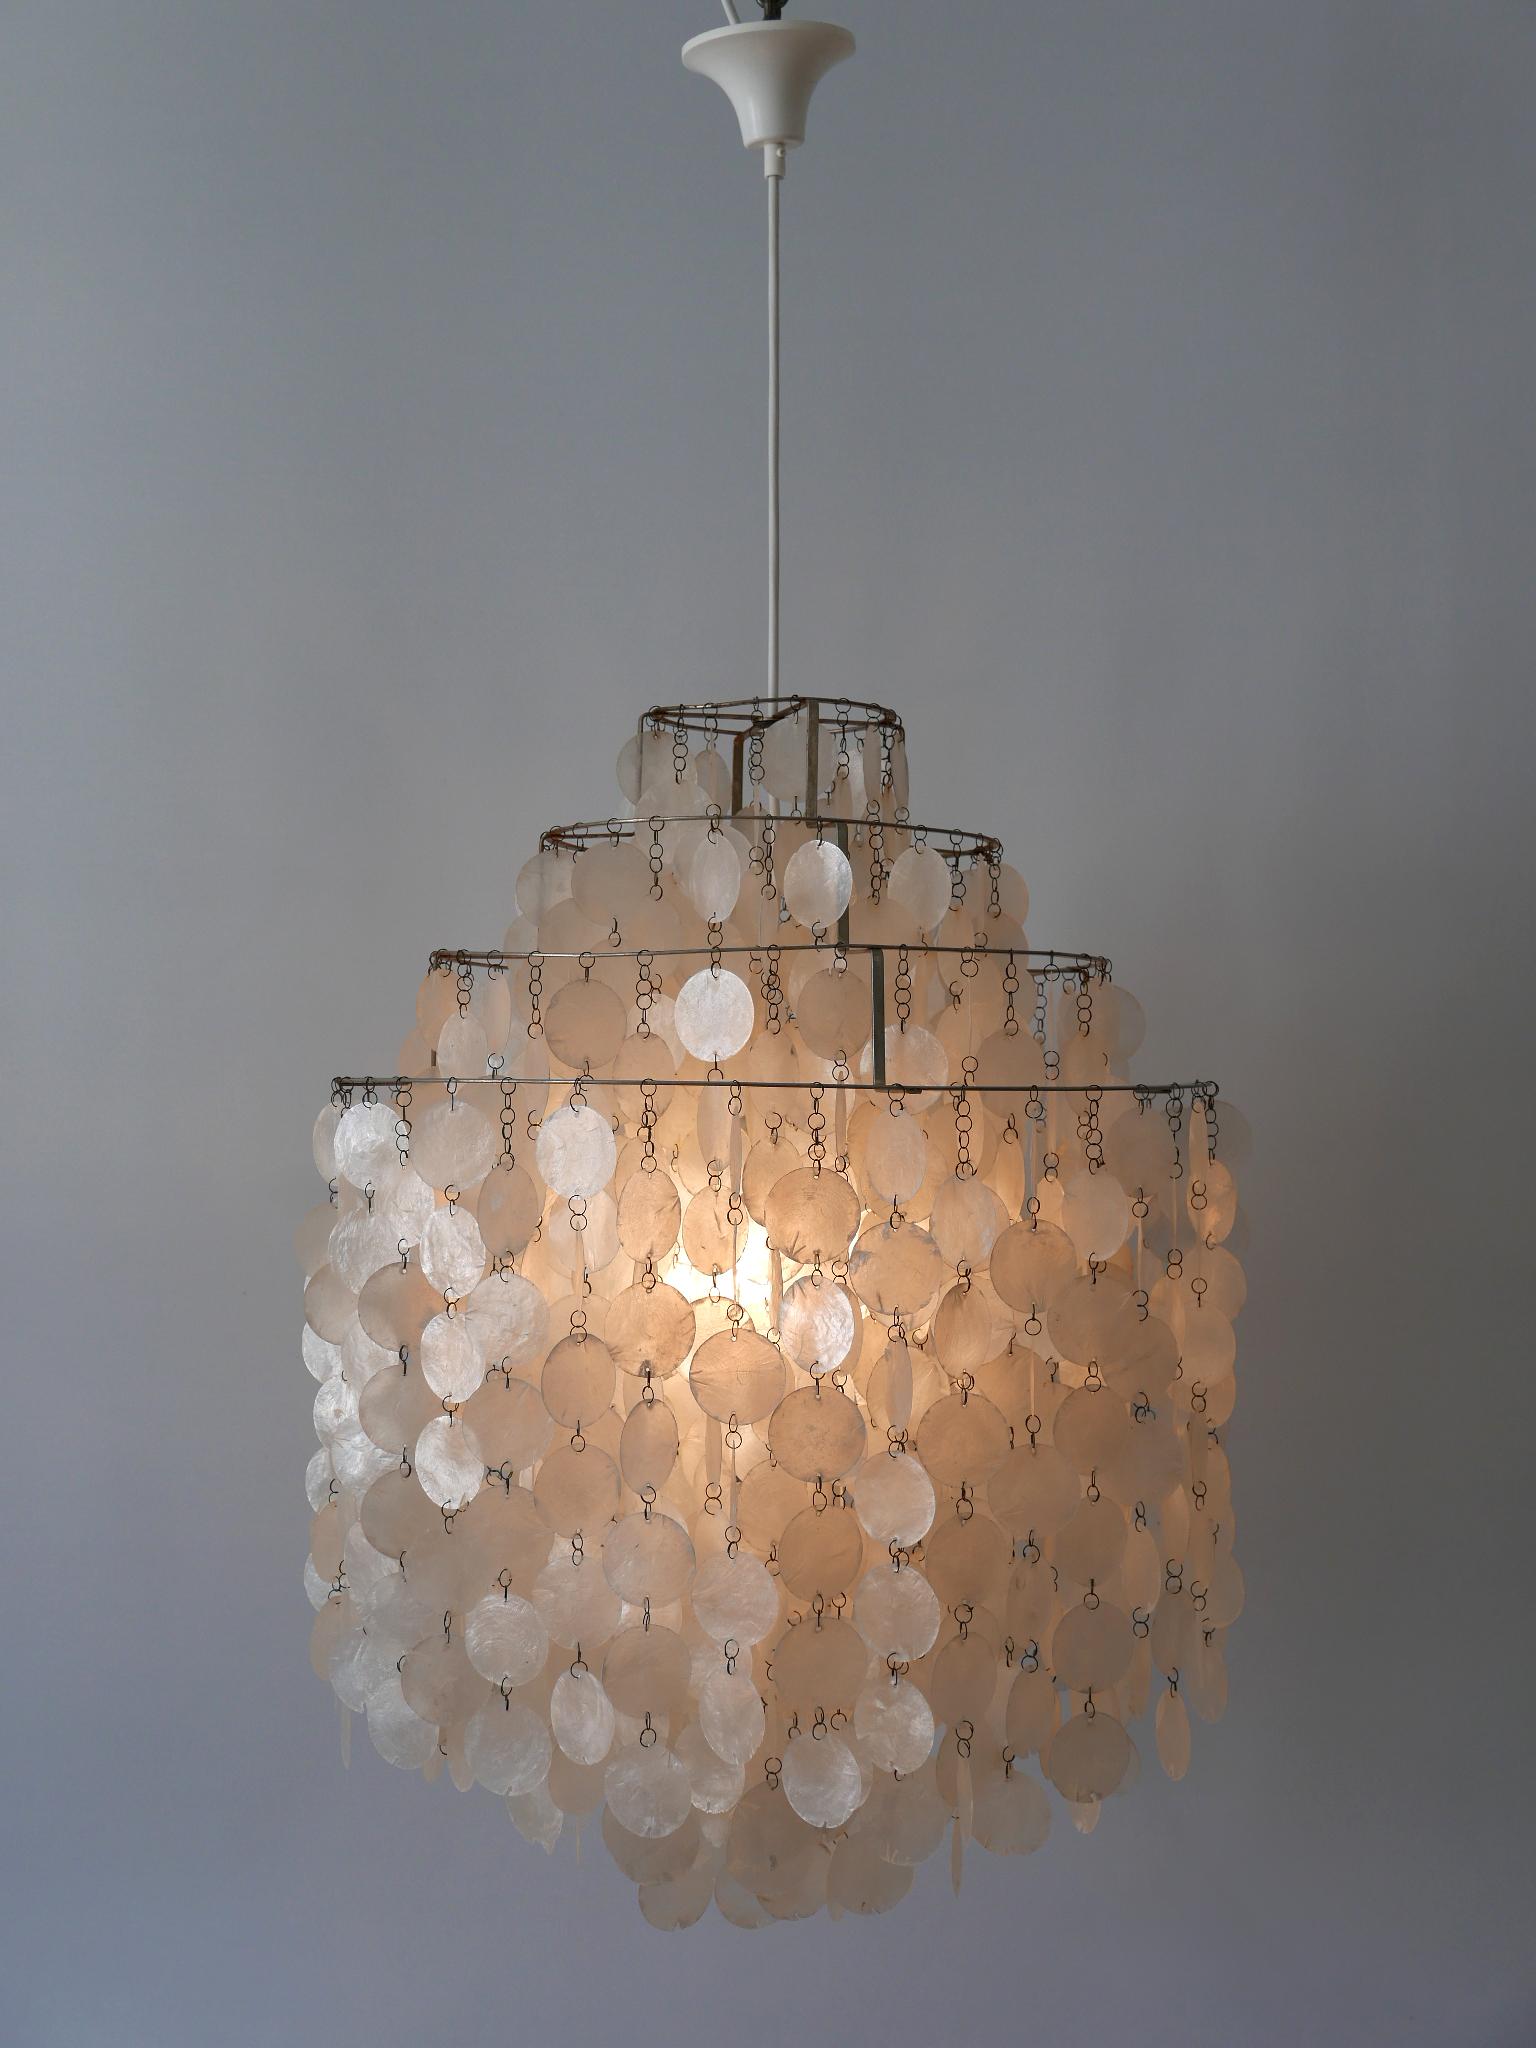 Early Pendant Lamp or Chandelier FUN 0DM by Verner Panton for Lüber CH 1960s In Good Condition For Sale In Munich, DE